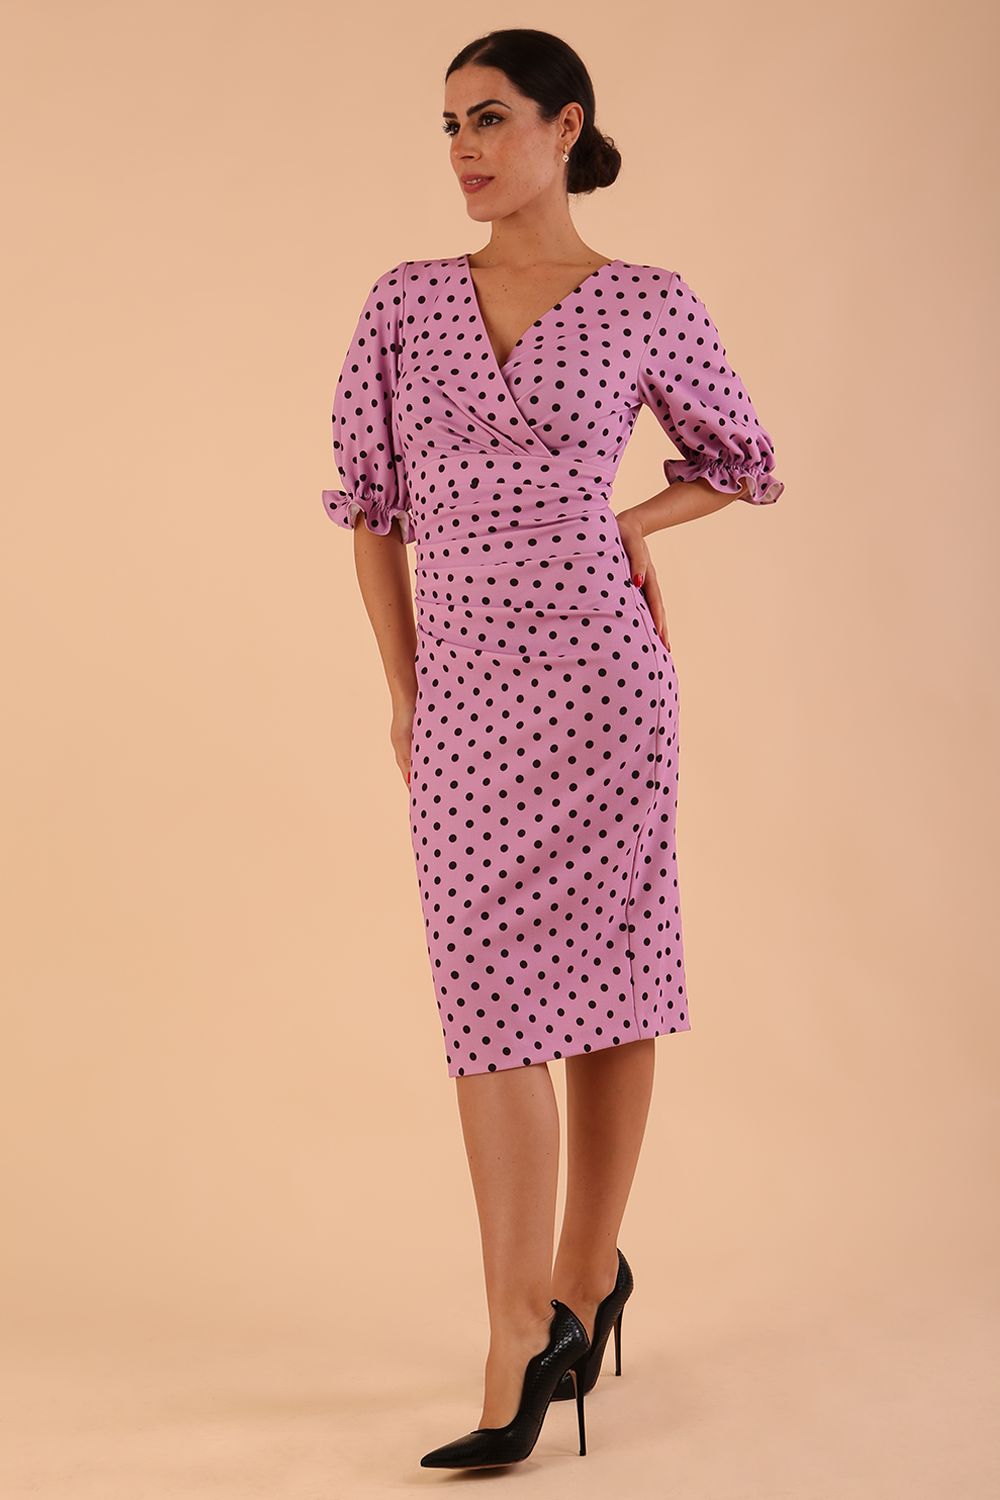 brunette model wearing diva catwalk palacio pencil fitted dress with three quarter puffed sleeve and pleating across the body with overlapping v-neckline in pink polka dot front